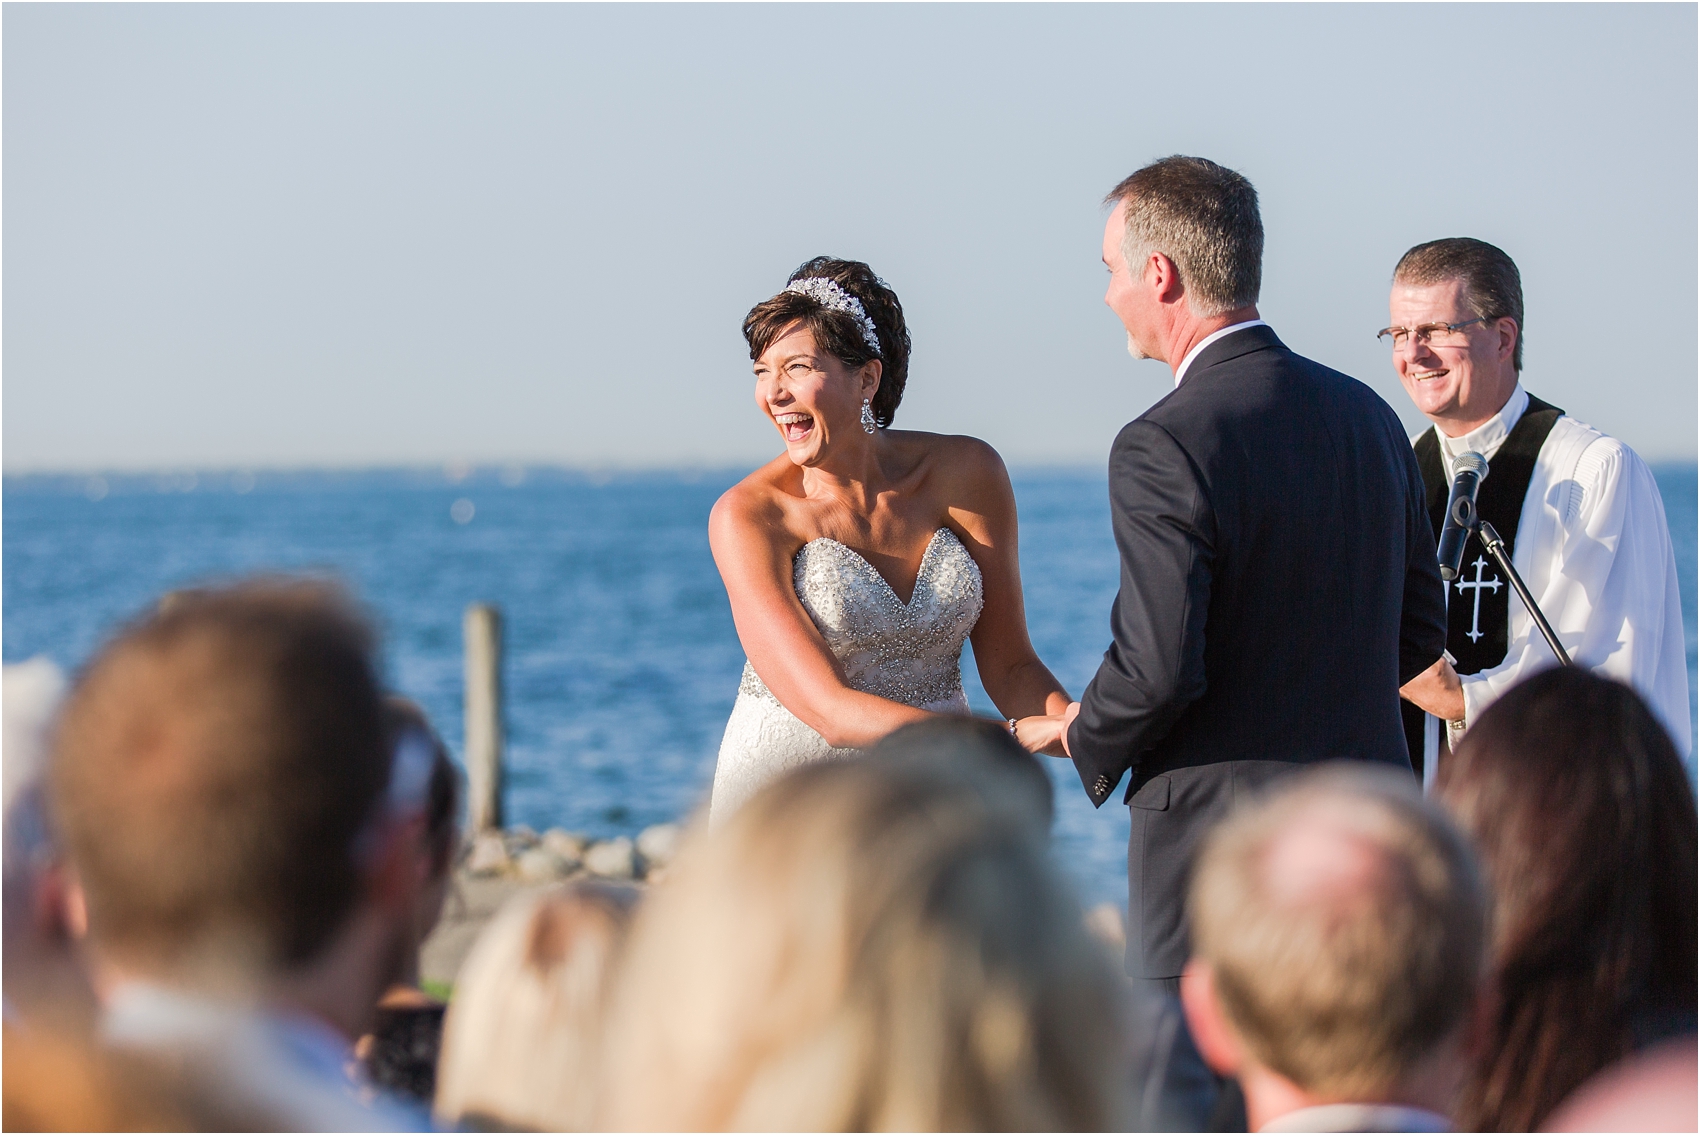 classic-natuical-inspired-wedding-photos-on-infinity-ovation-yacht-in-st-clair-shores-mi-by-courtney-carolyn-photography_0049.jpg